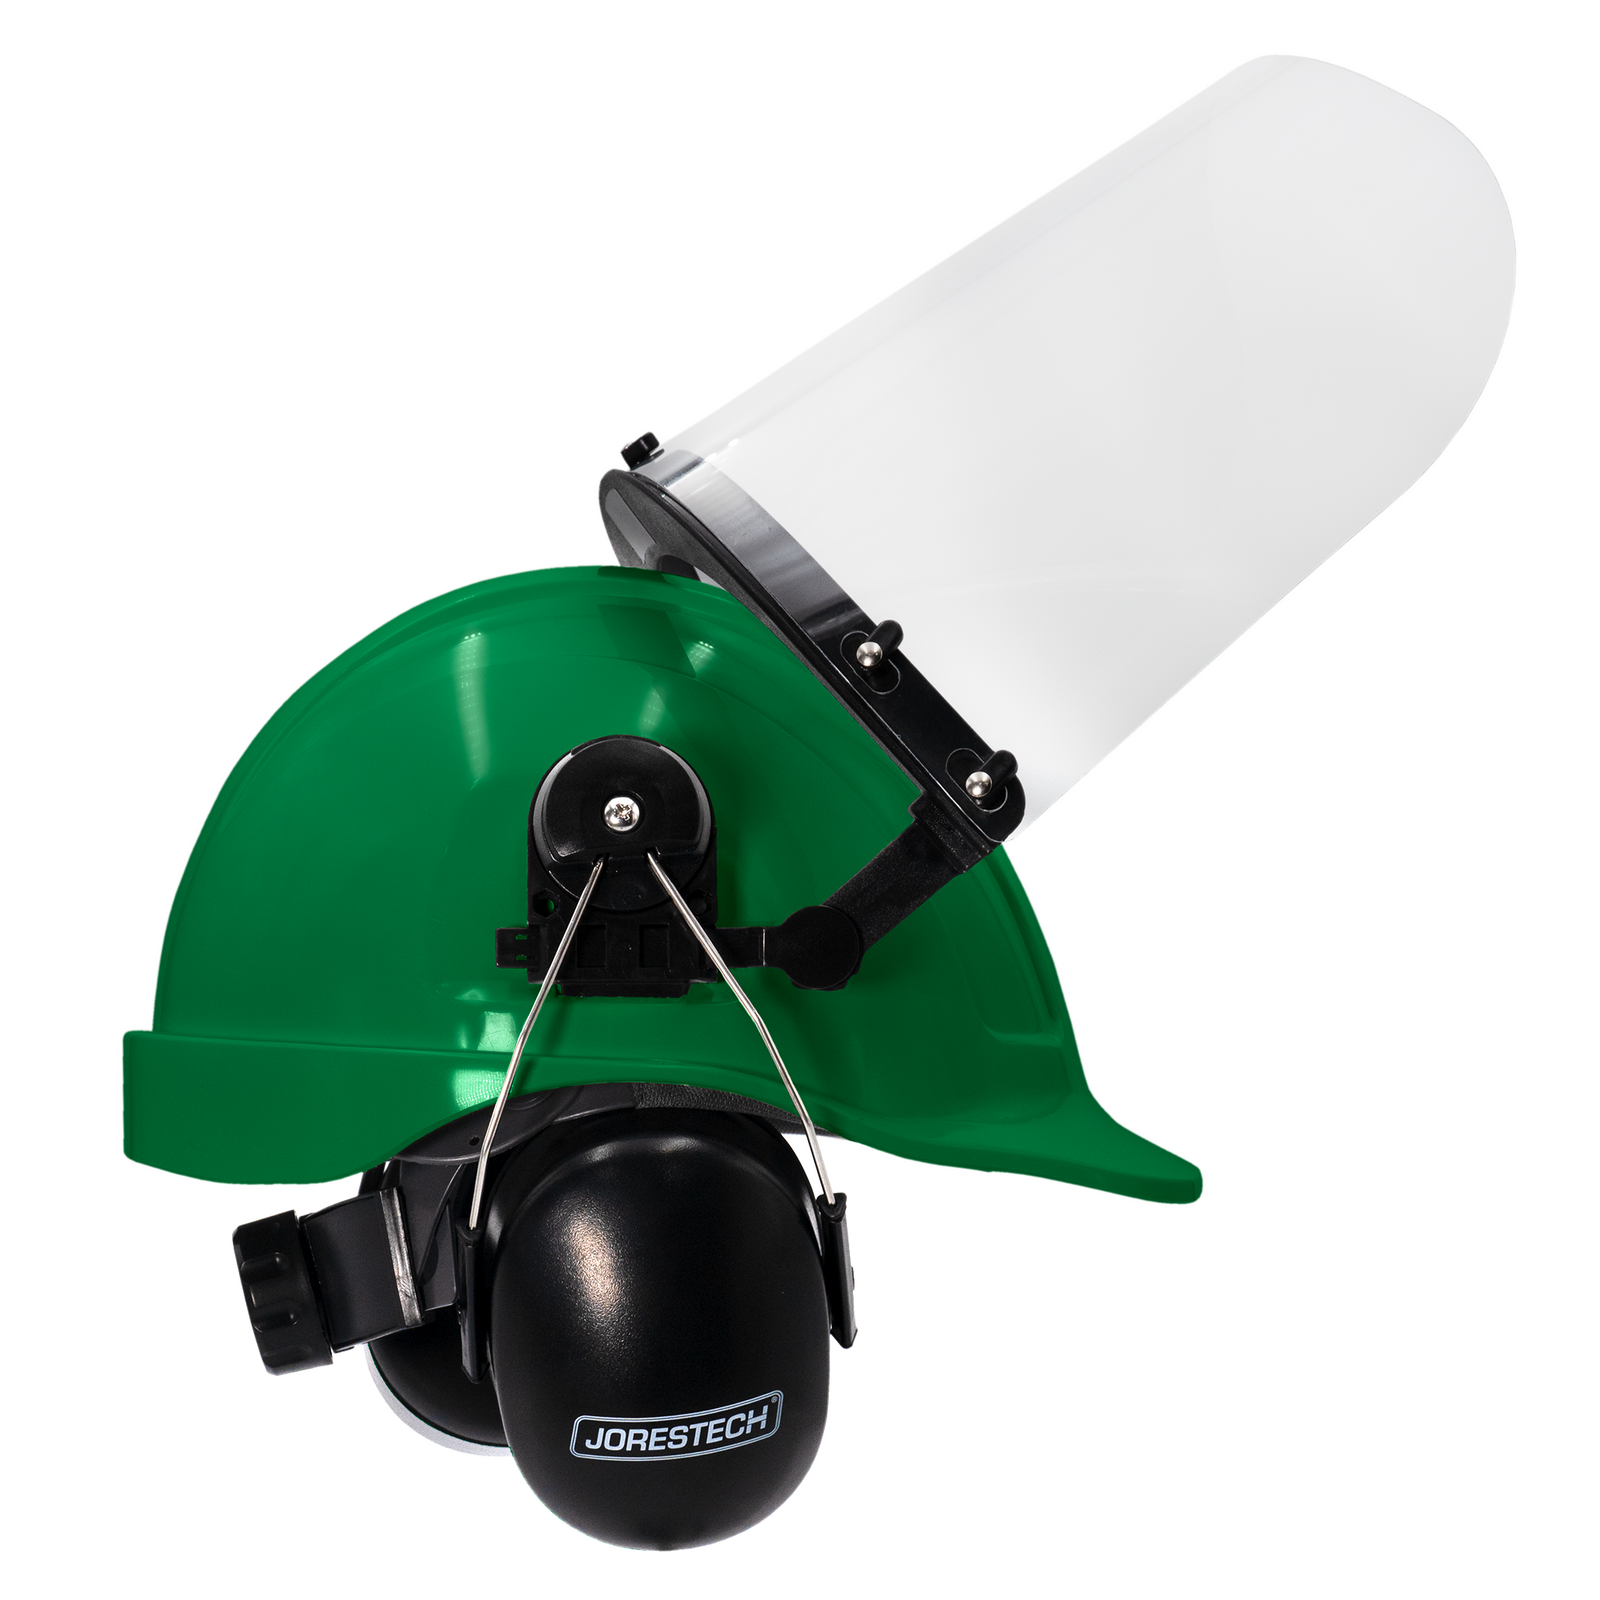 Green cap style hard hat kit with mountable earmuffs and hi-transparency face shield